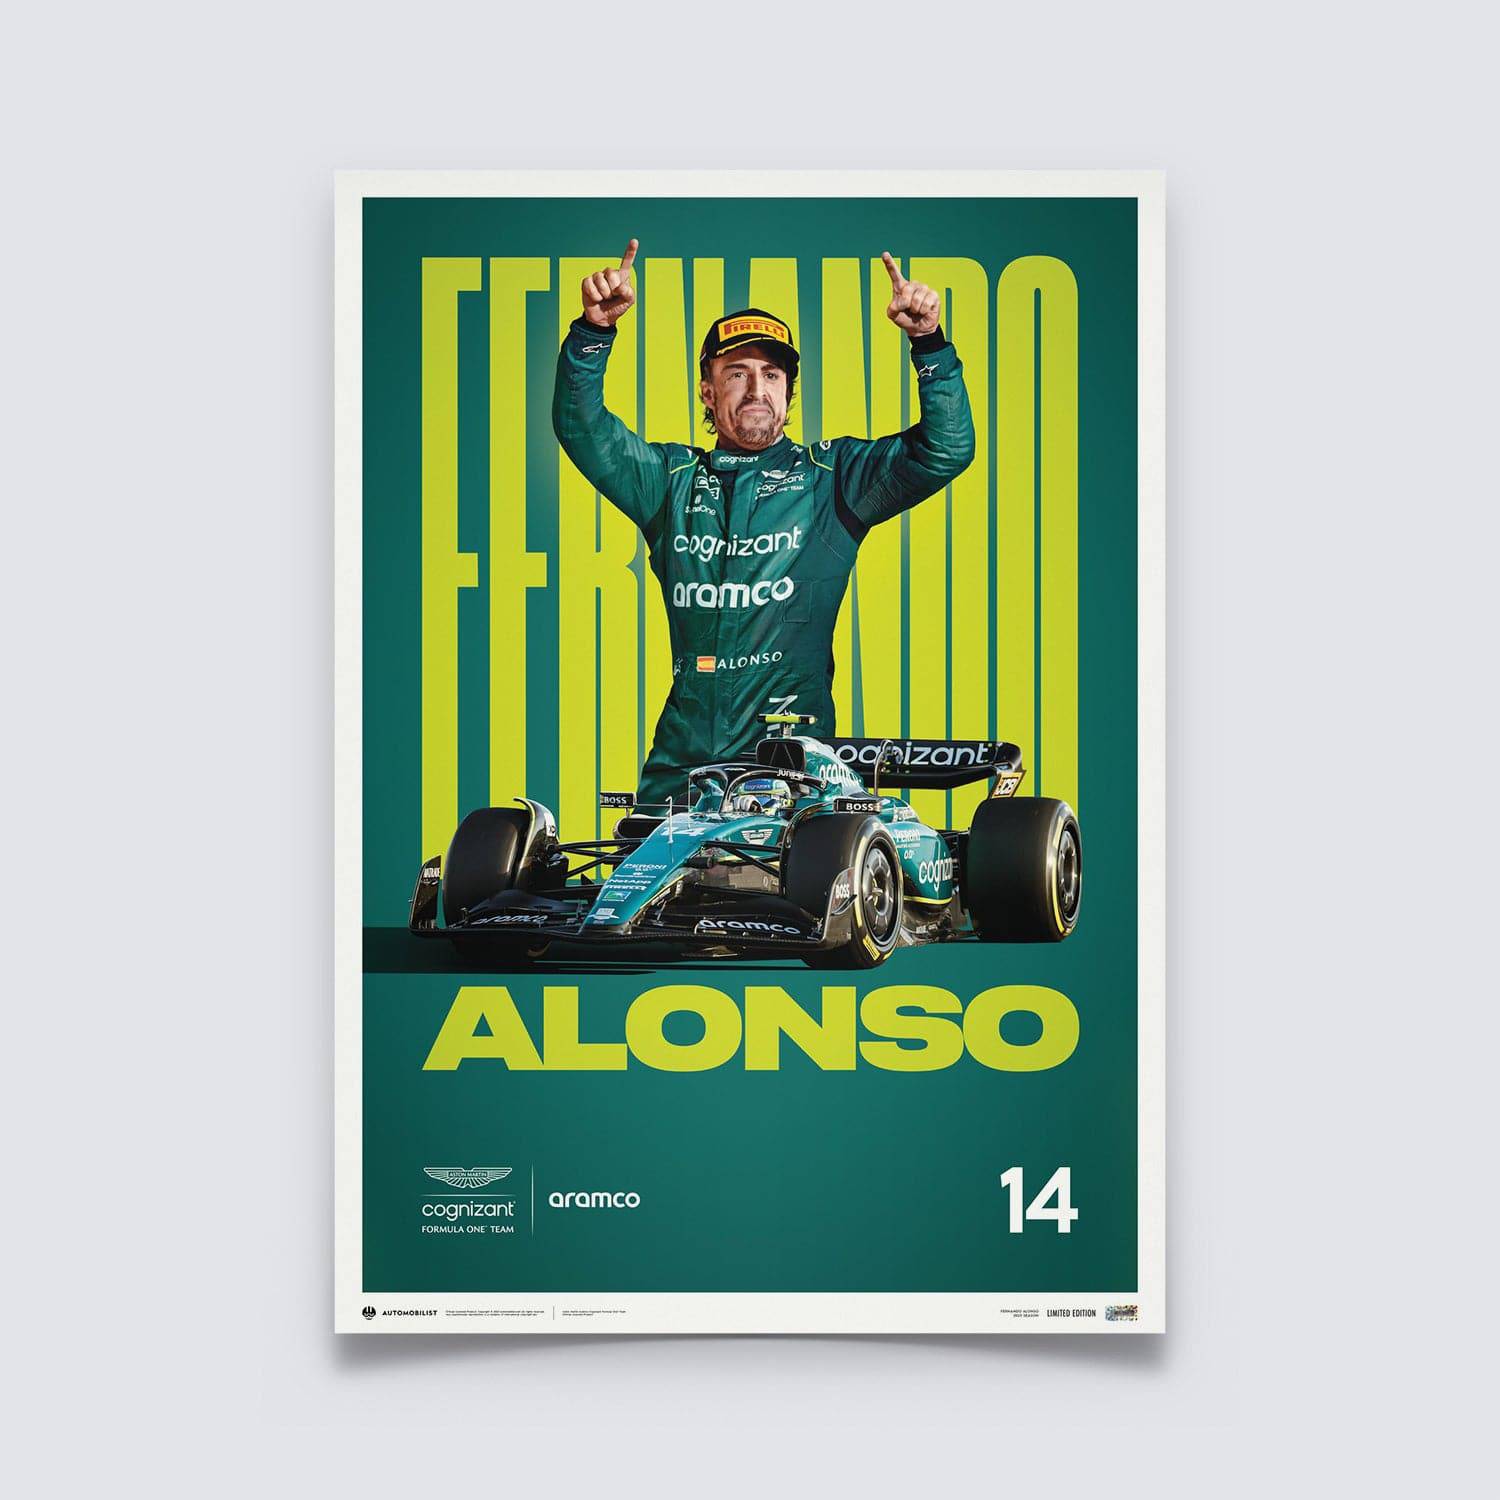 SeviGraphics X પર: Fernando Alonso Poster 2018. A new era in @McLarenF1  👀#BeBrave #Mclaren #MCL33 #Alonso  / X